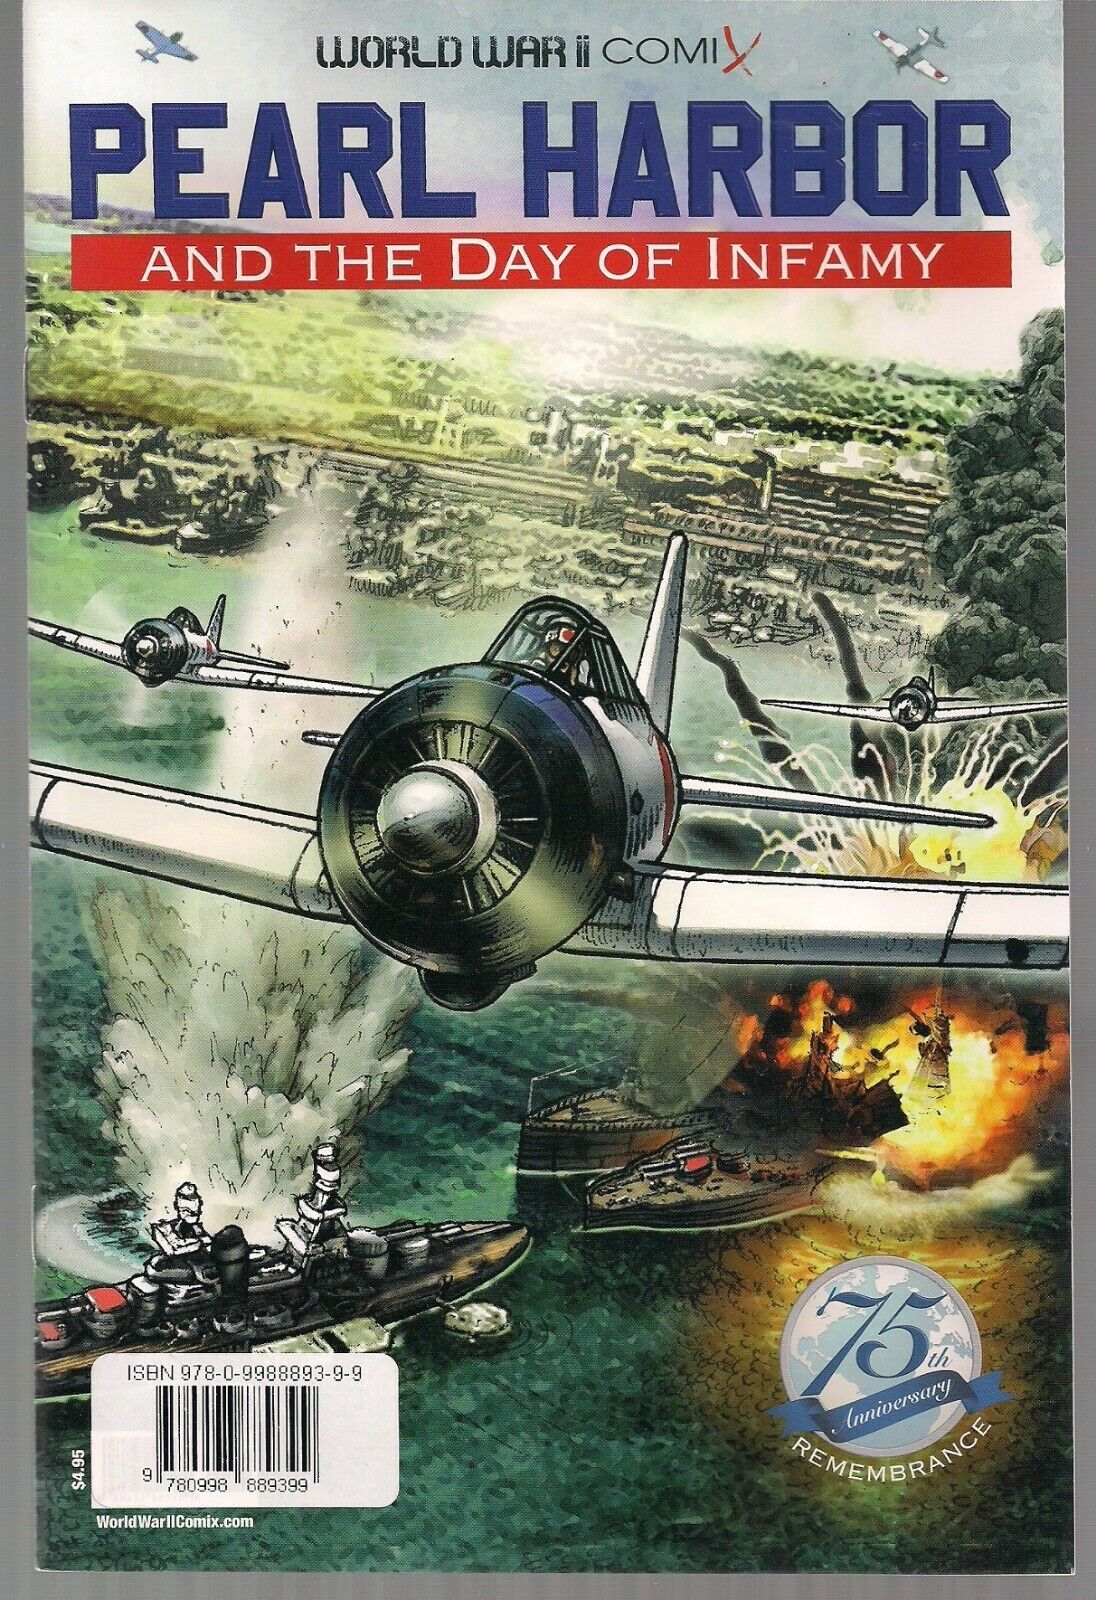 PEARL HARBOR AND THE DAY OF INFAMY 2016 MONROE 75th ANNIVERSARY REMEMBRANCE NM